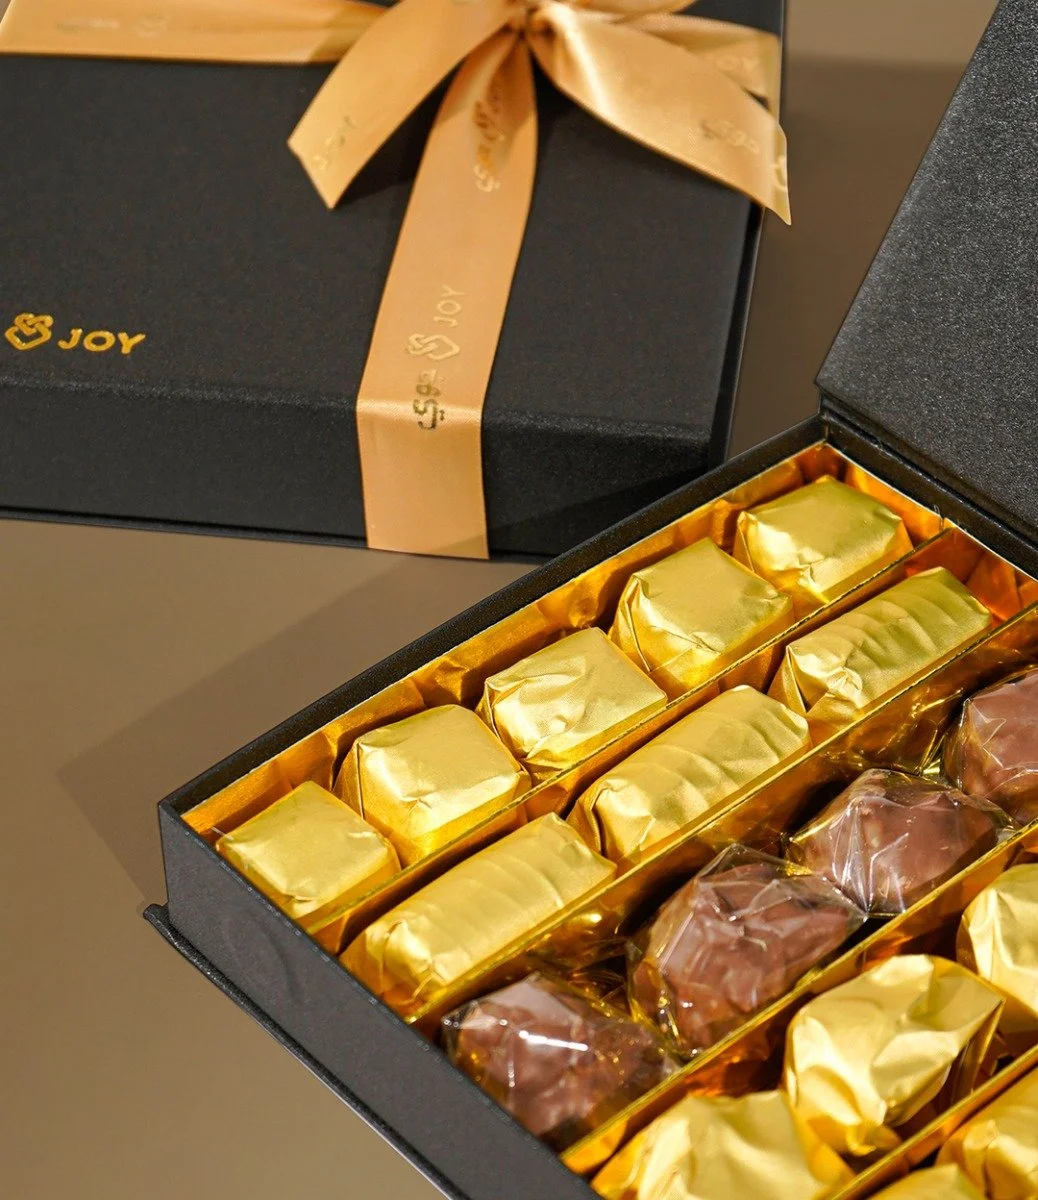 Joy Box Delux & Small Delux Mix By Joy Chocolate 